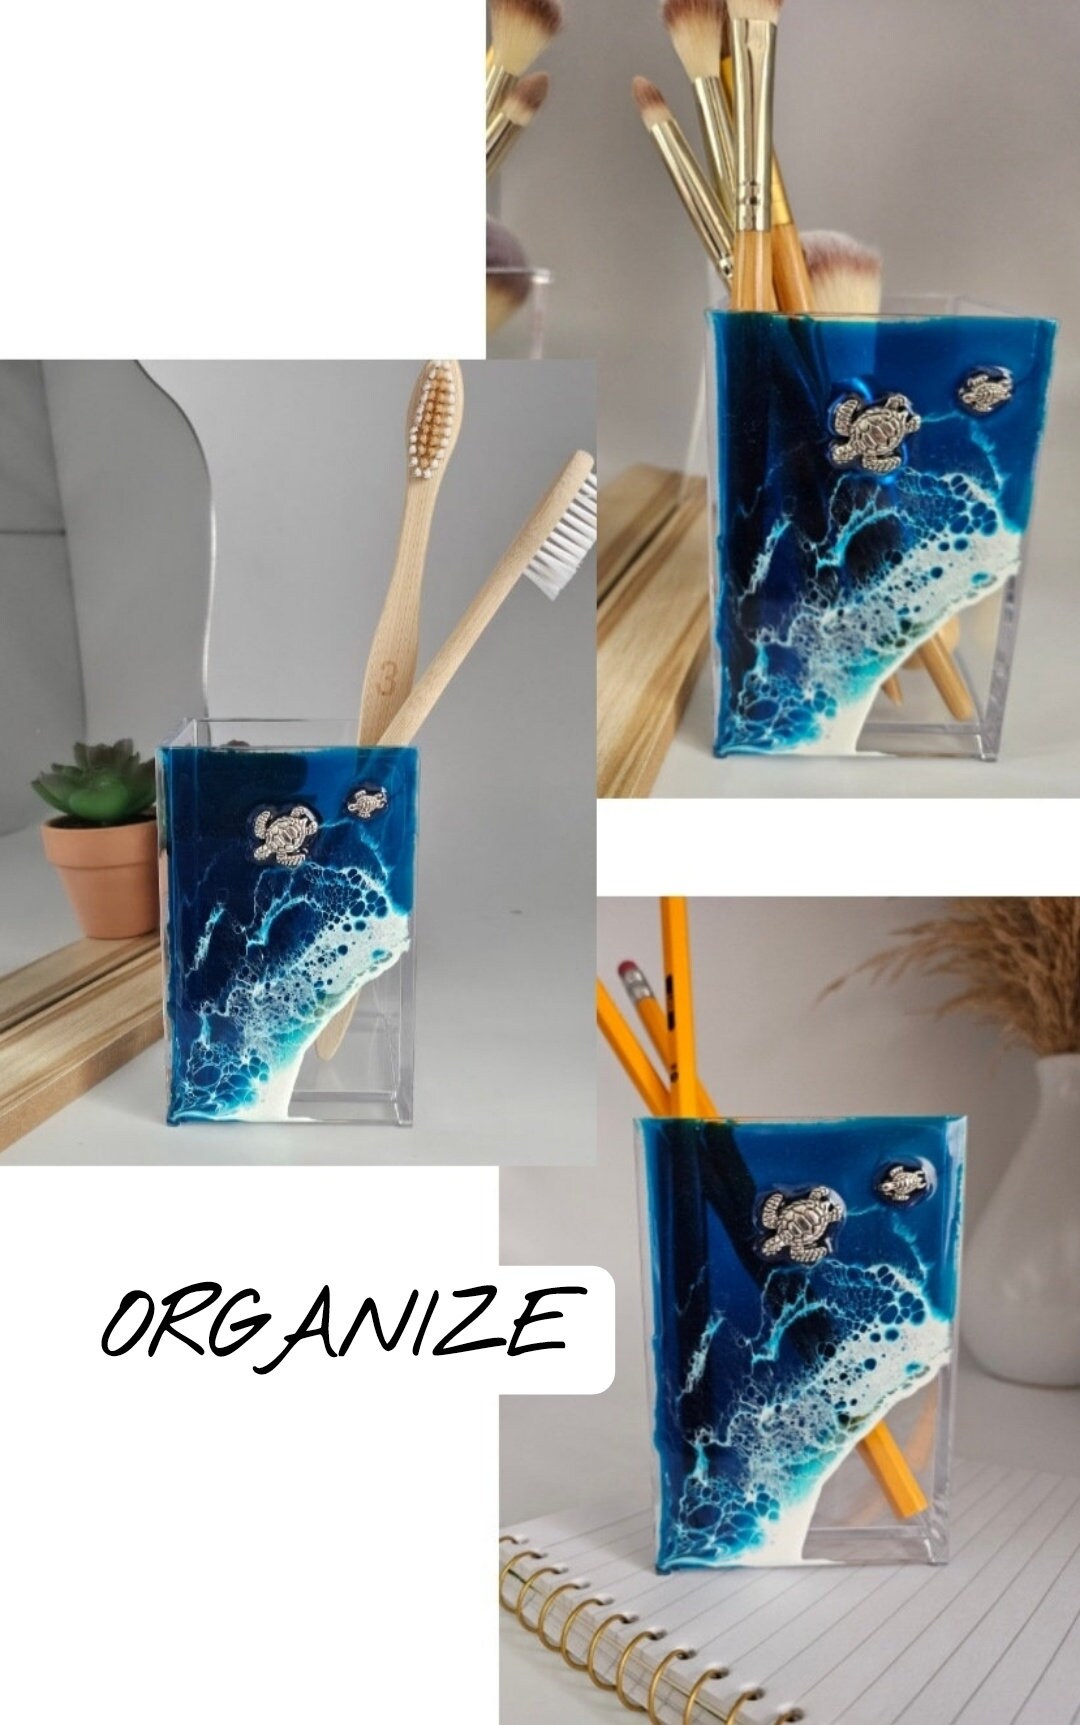 Songs of the Sea' Desk Organizer for Kids – Al Things Beautiful